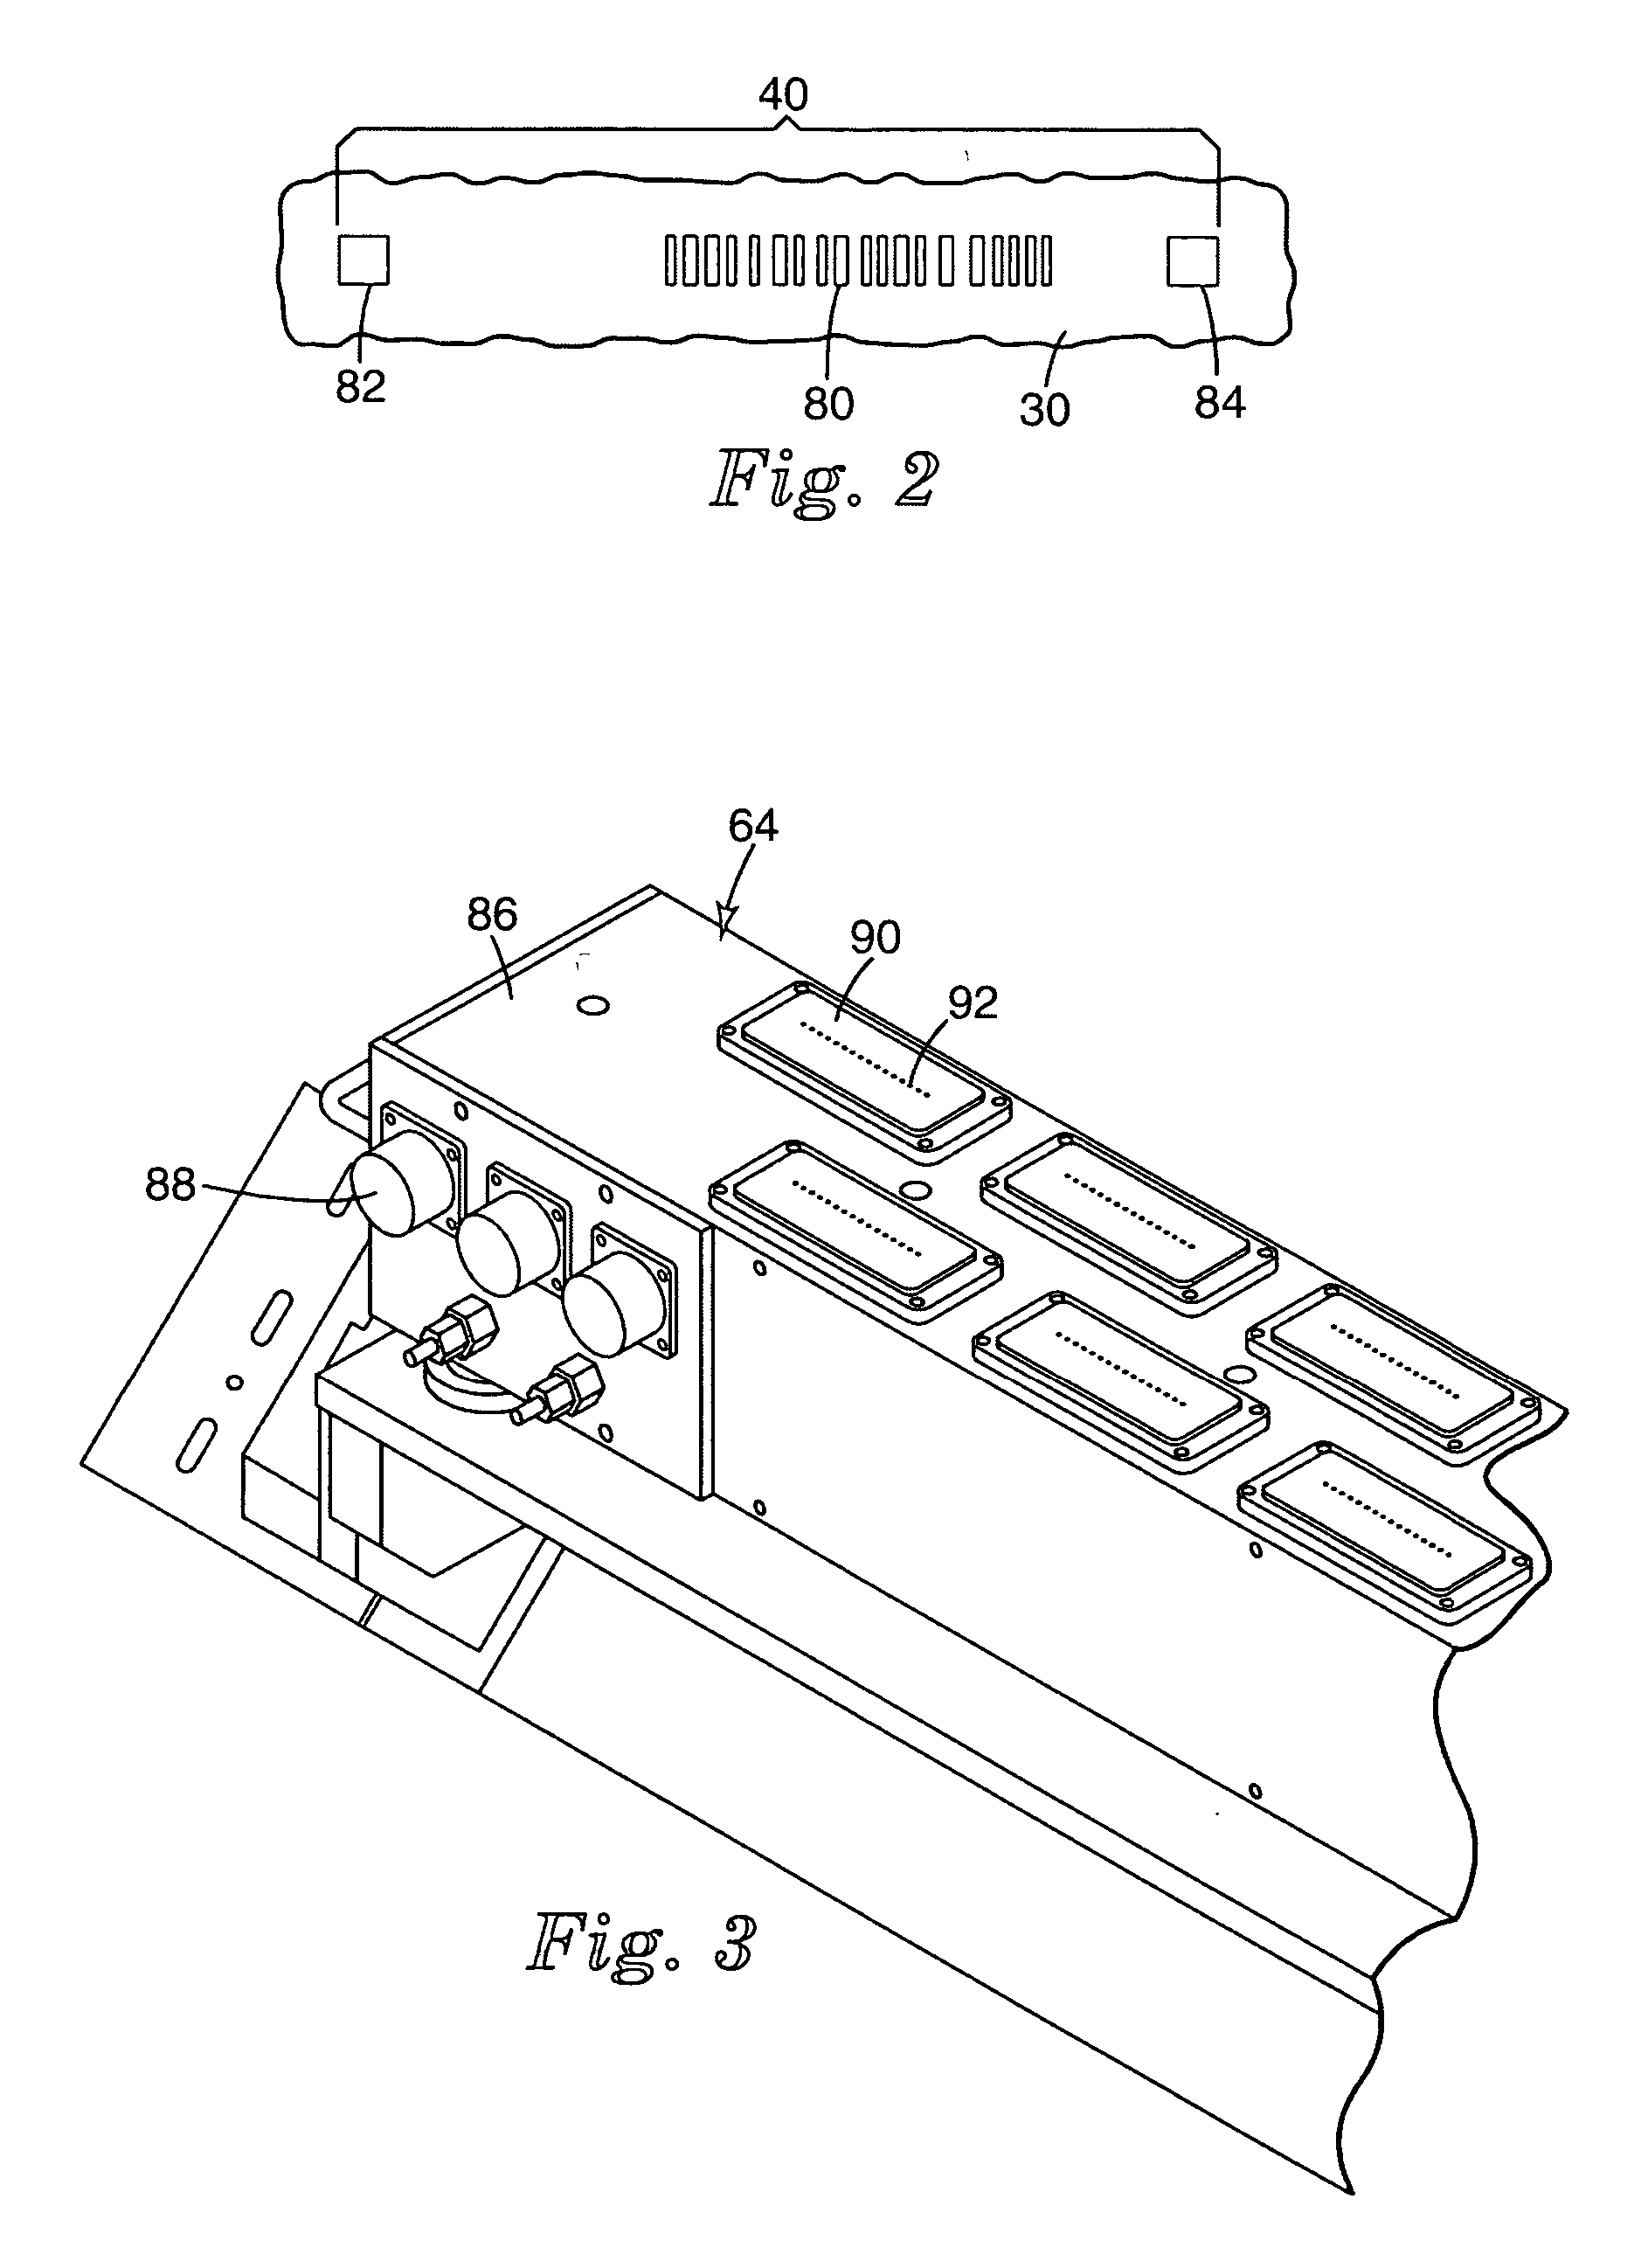 Apparatus and method for the automated marking of defects on webs of material